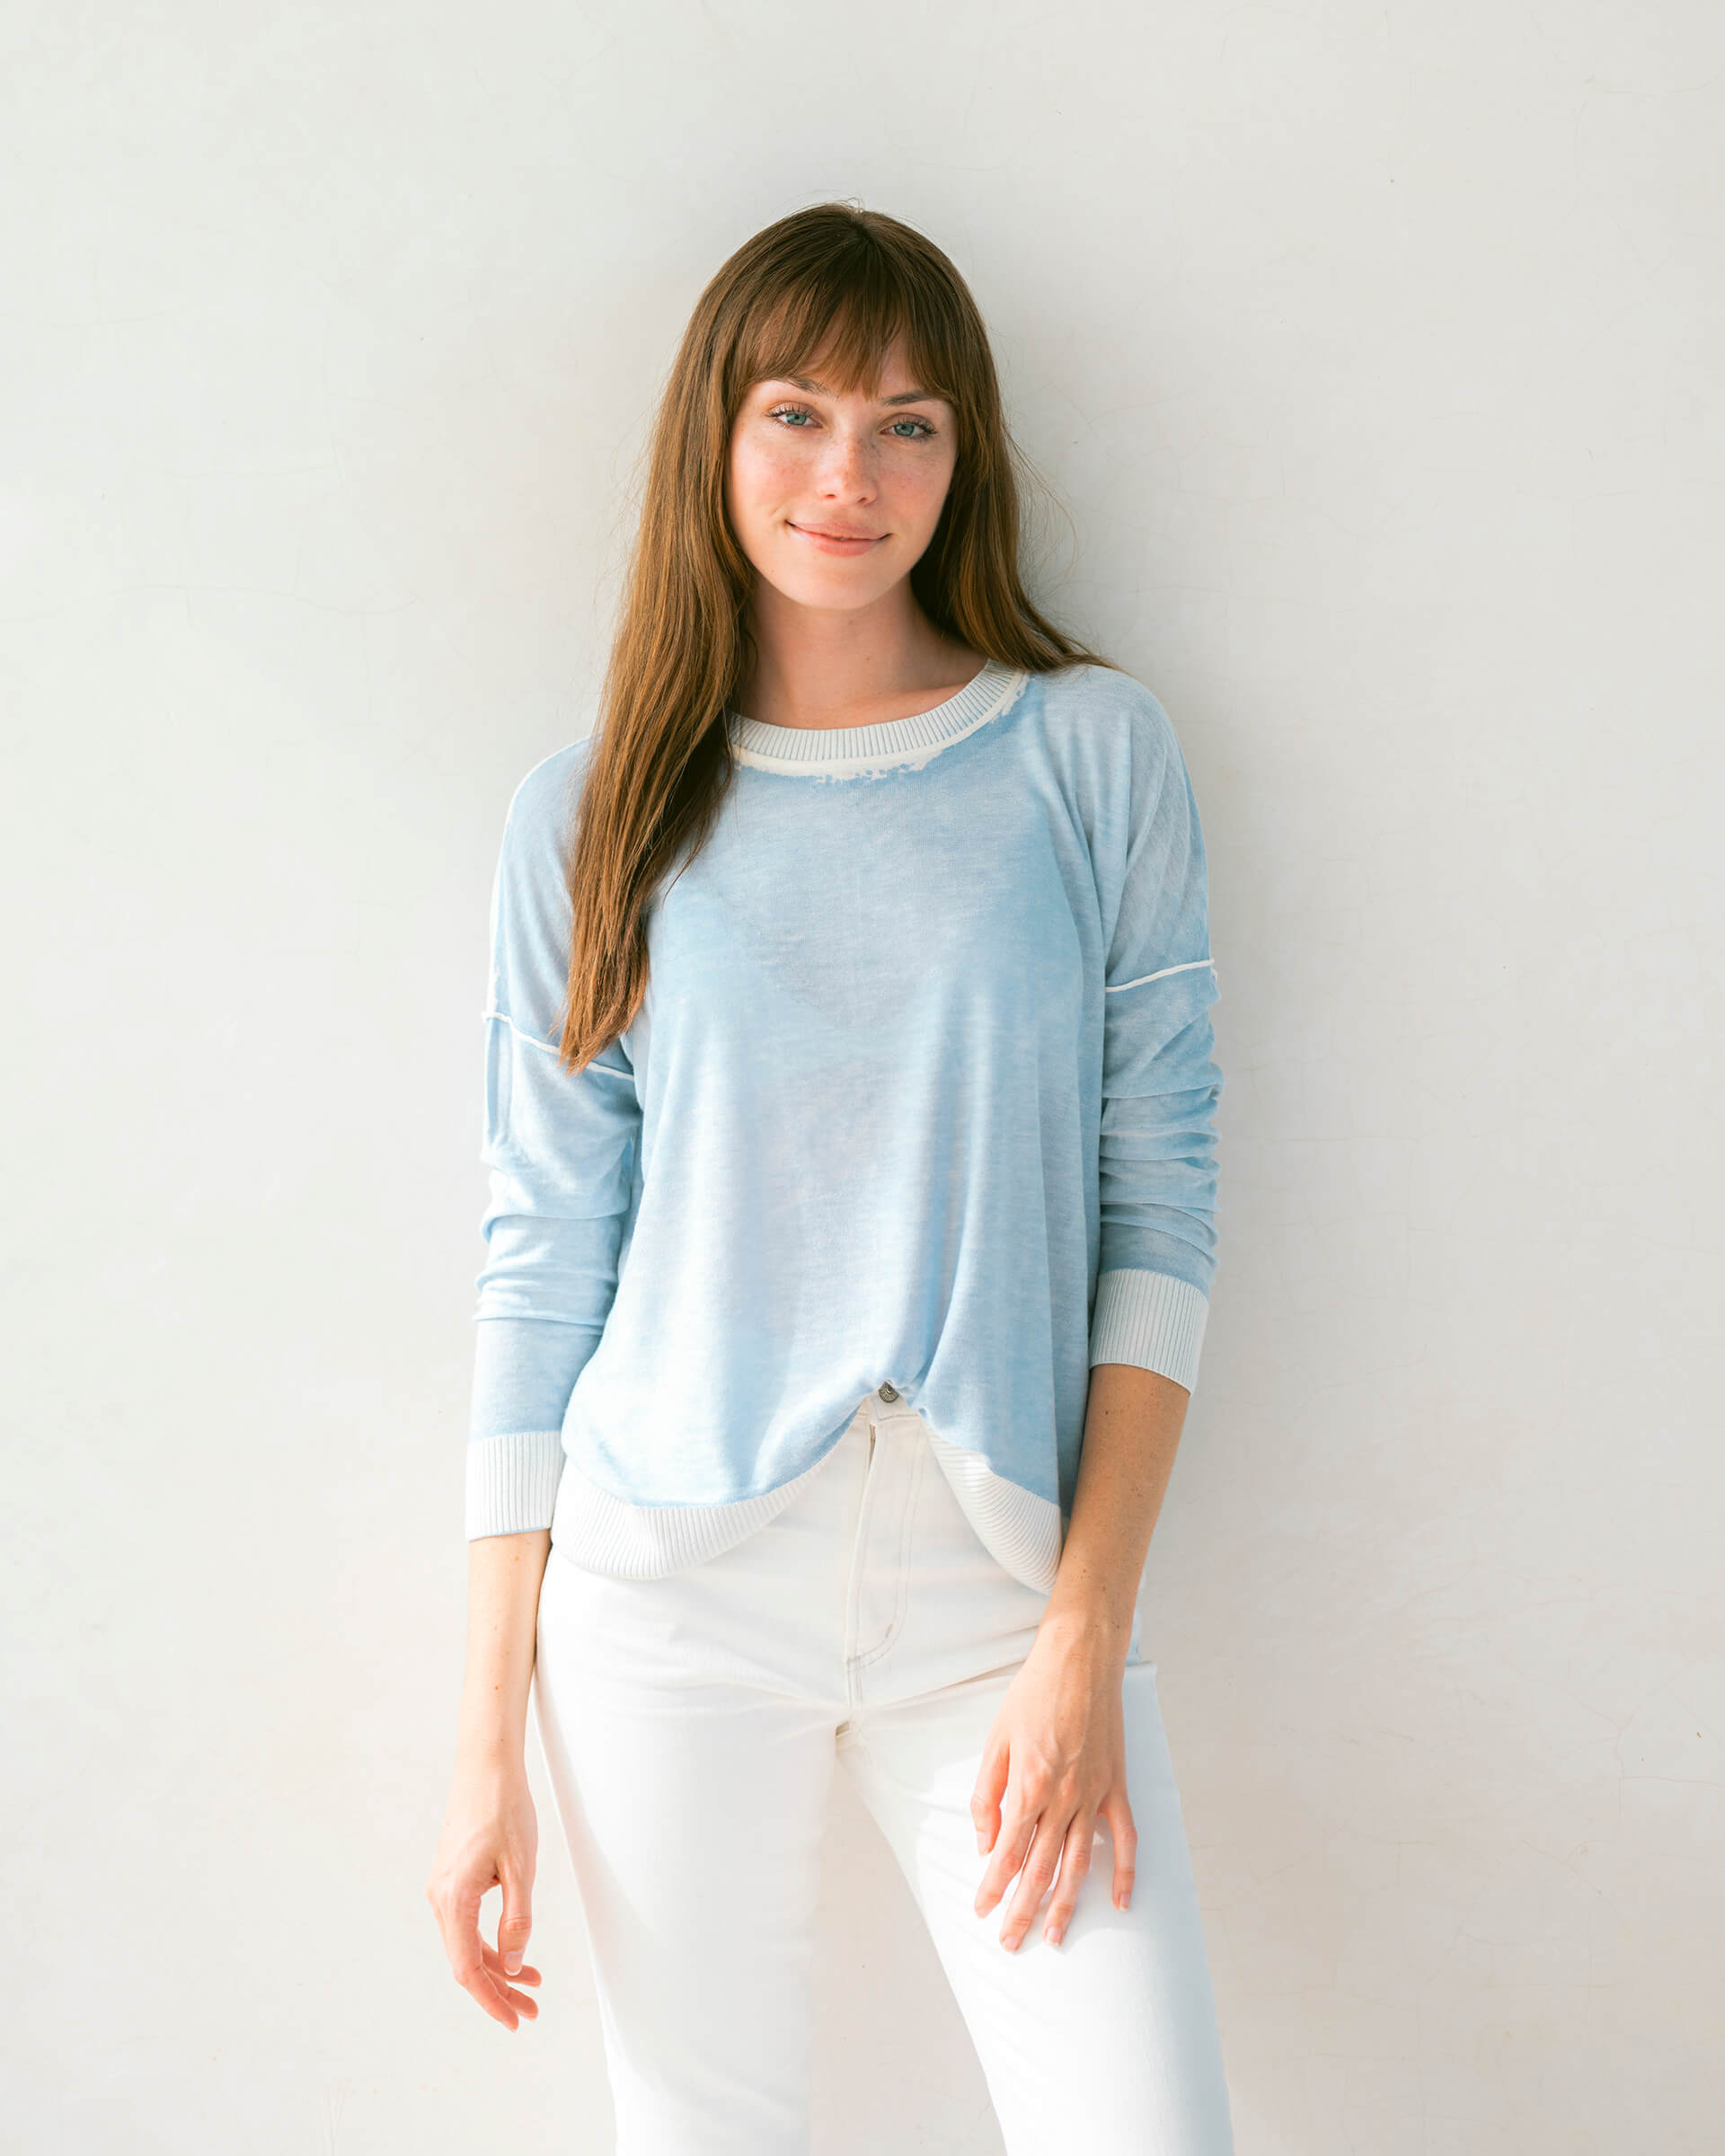 brunette female wearing light blue sweater standing in front of a white wall